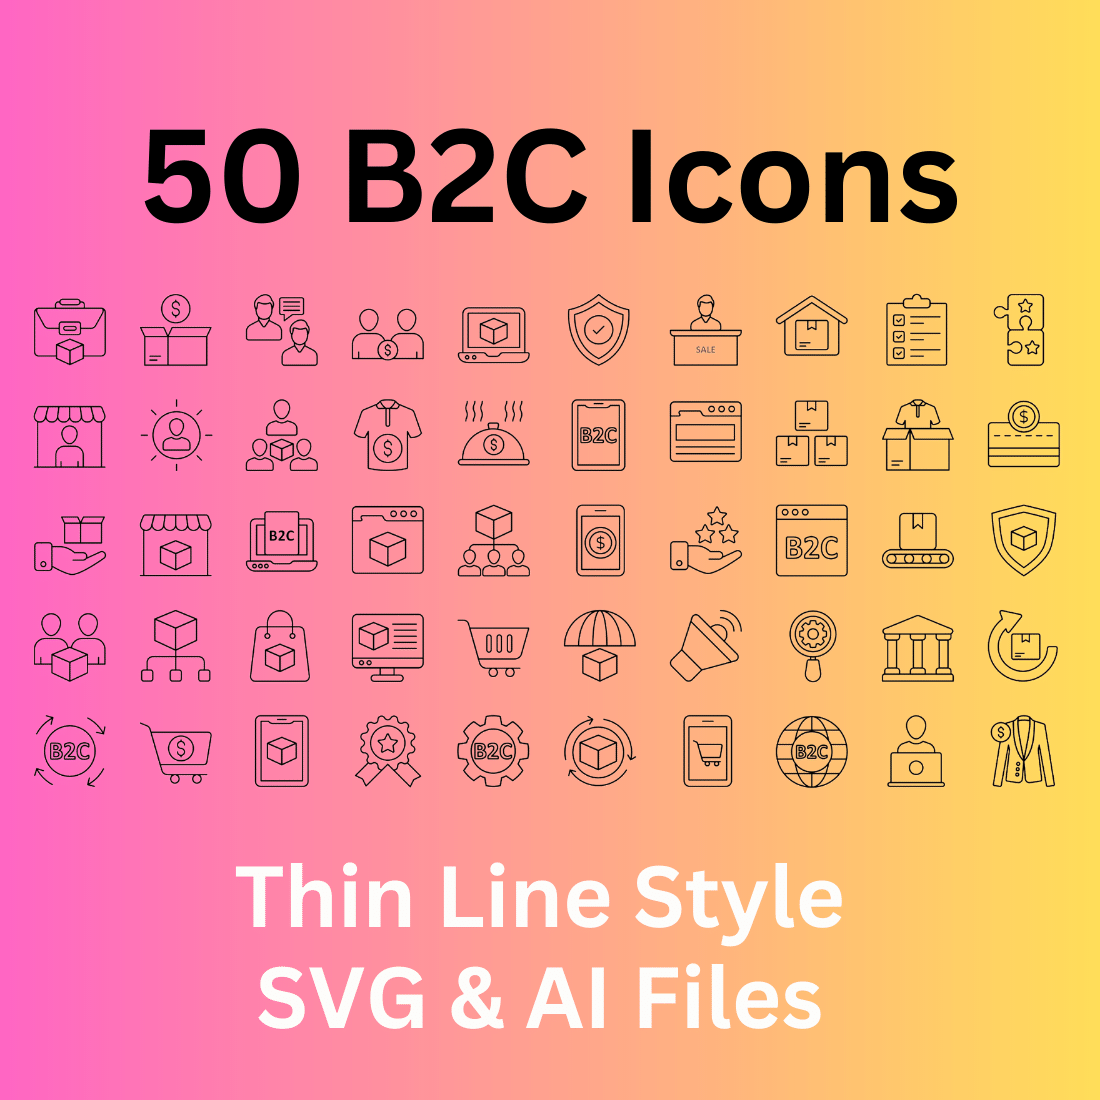 B2C Icon Set 50 Outline Icons - SVG And AI Files cover image.